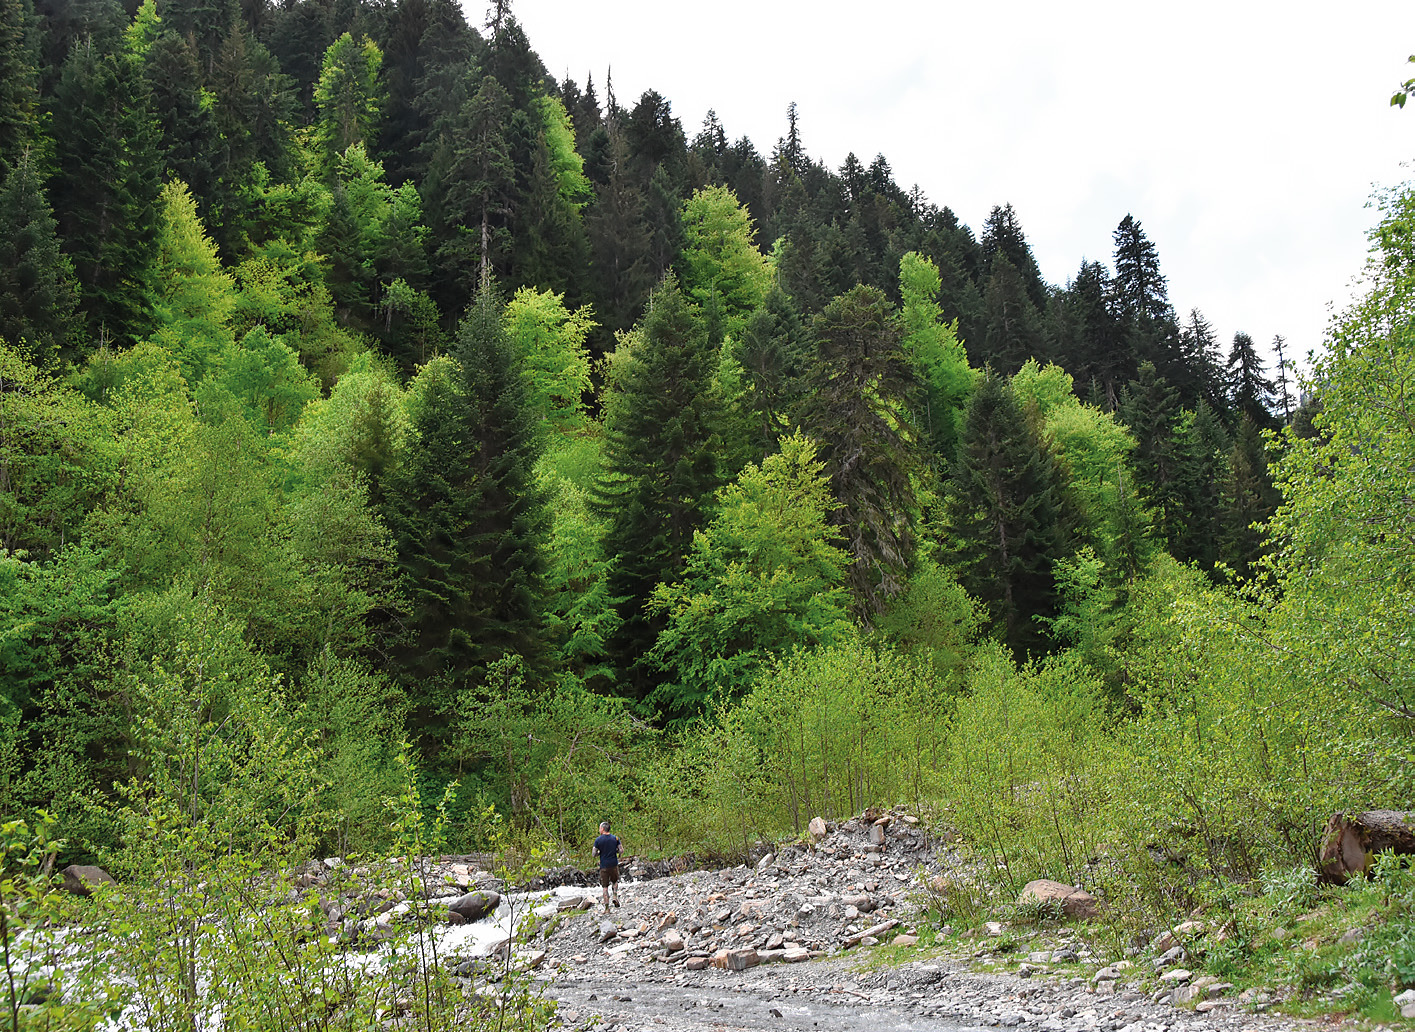 Abies fargesii in central China growing through the canopy of birches (Betula utilis) that have created suitable growing conditions for the firs to establish and develop well.